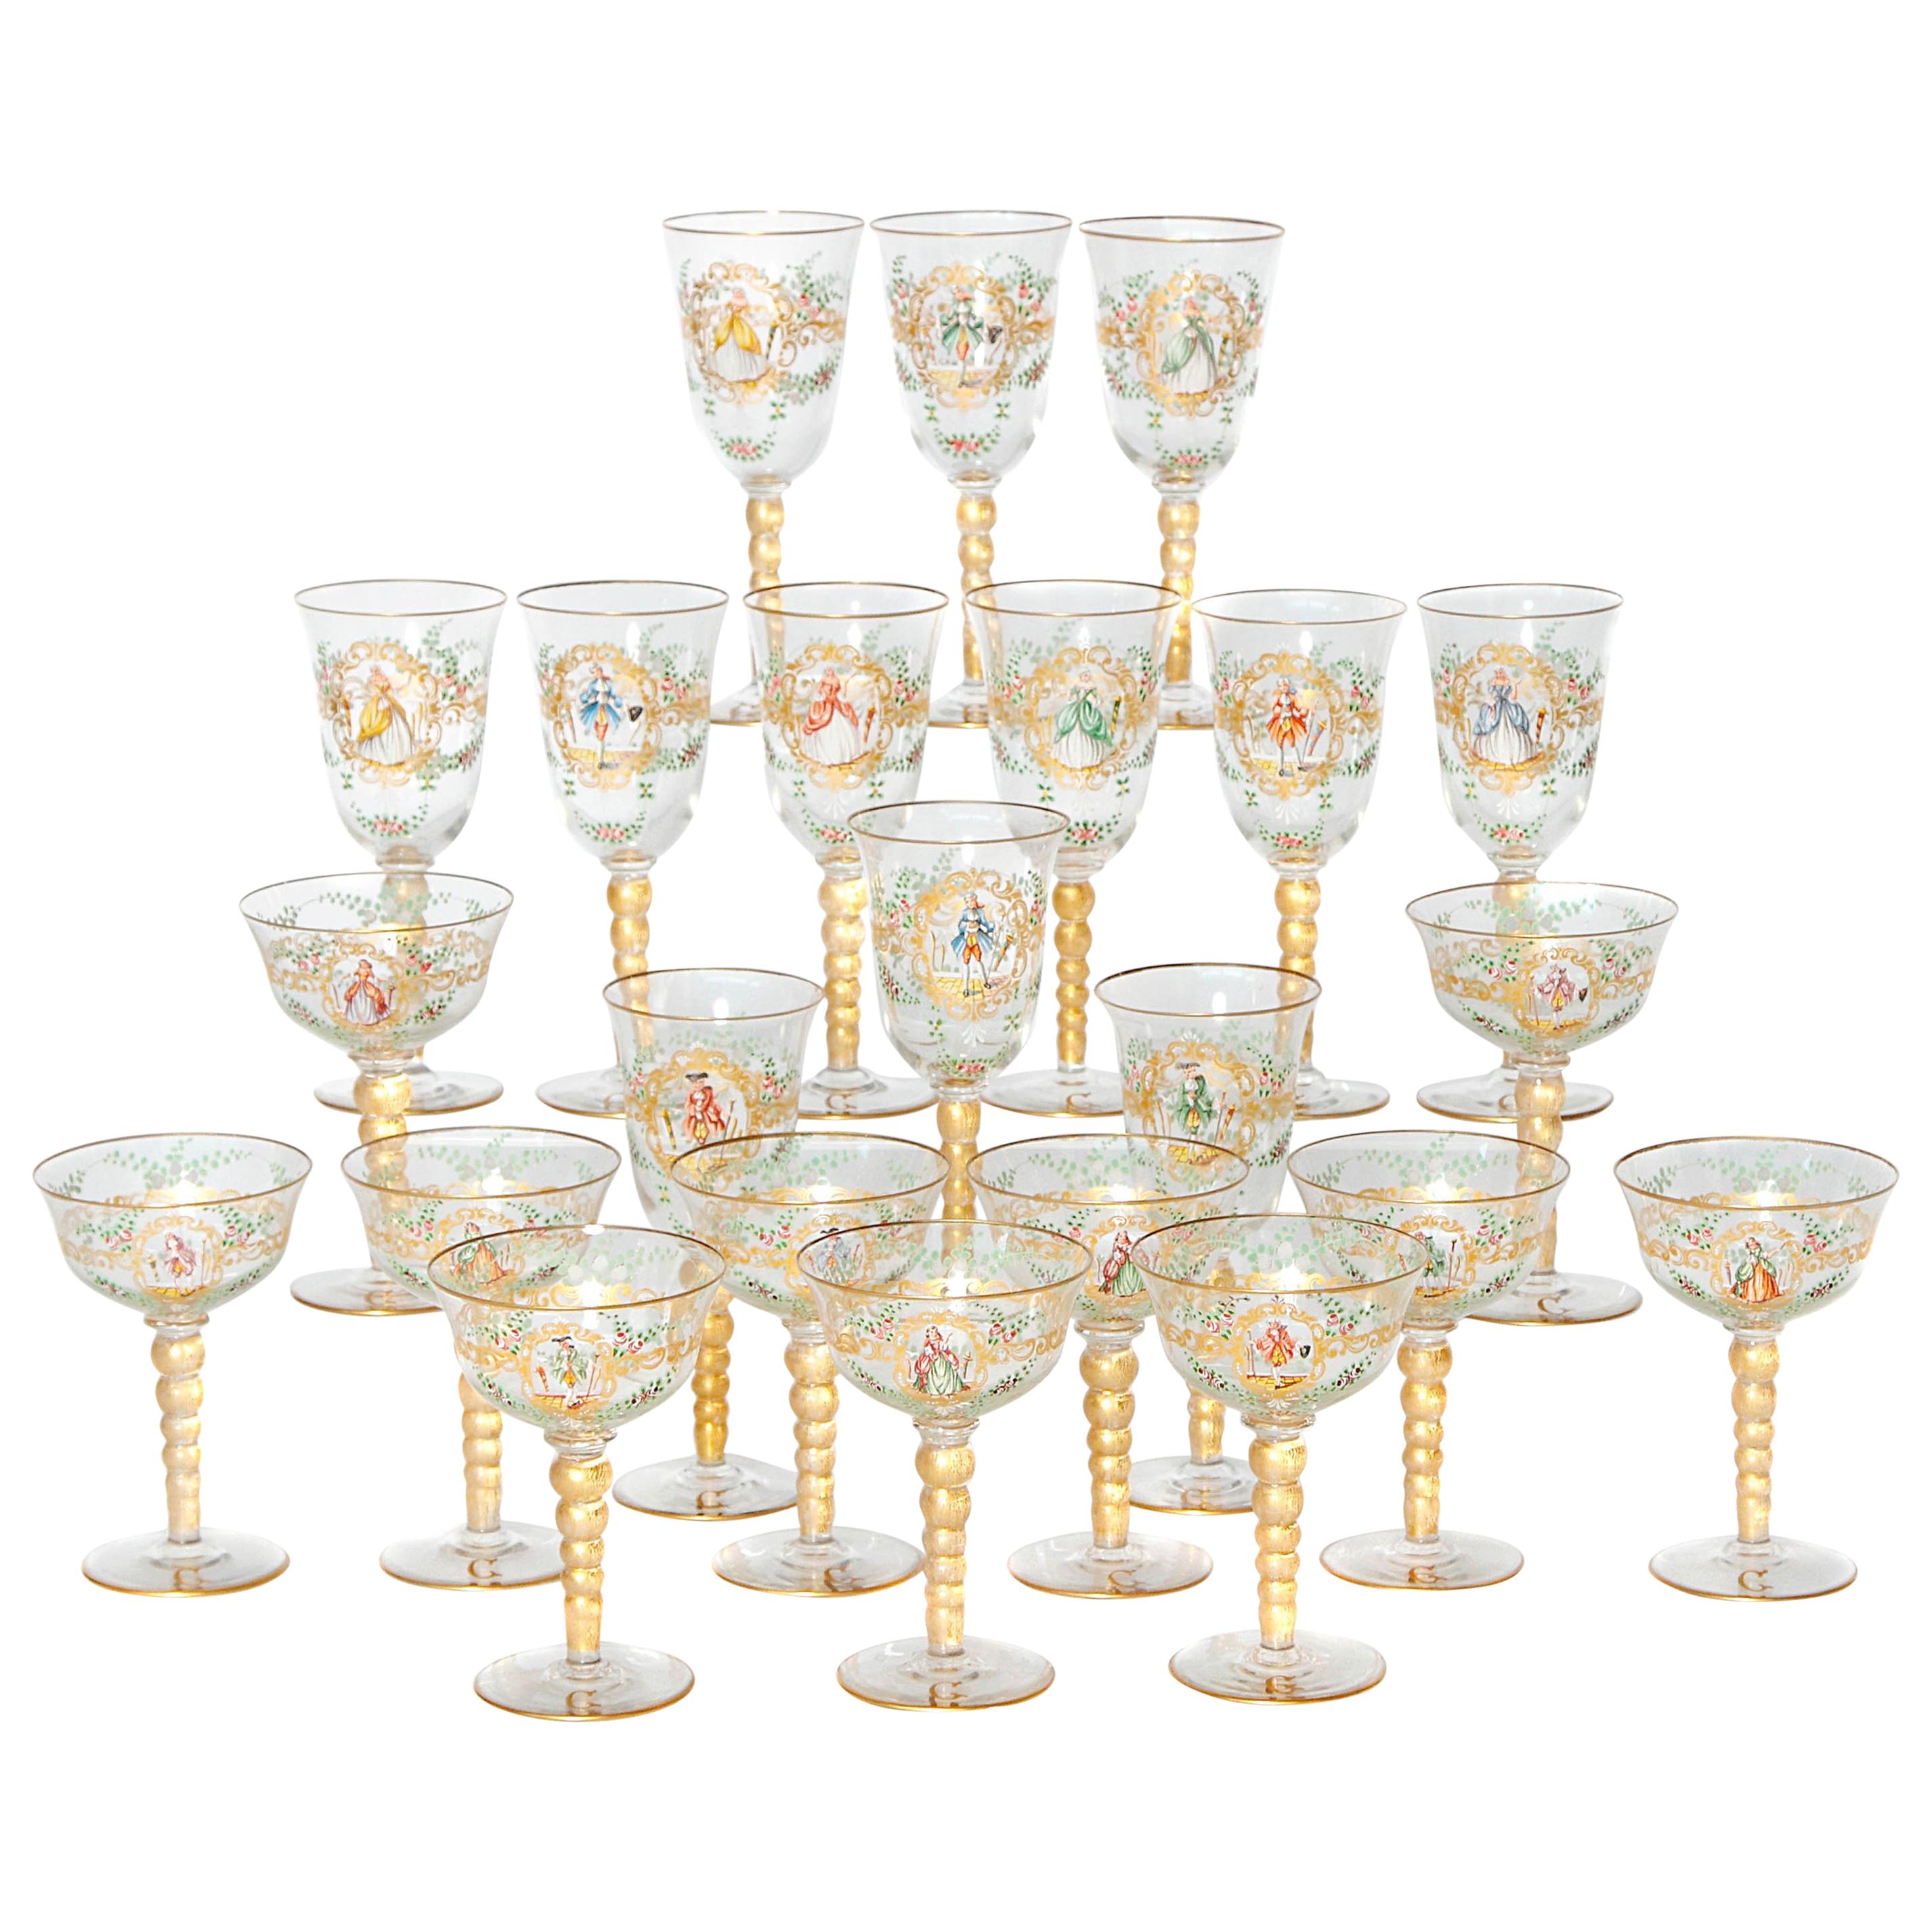 Enameled Venetian Glass Stemware or Group of 23 Pieces